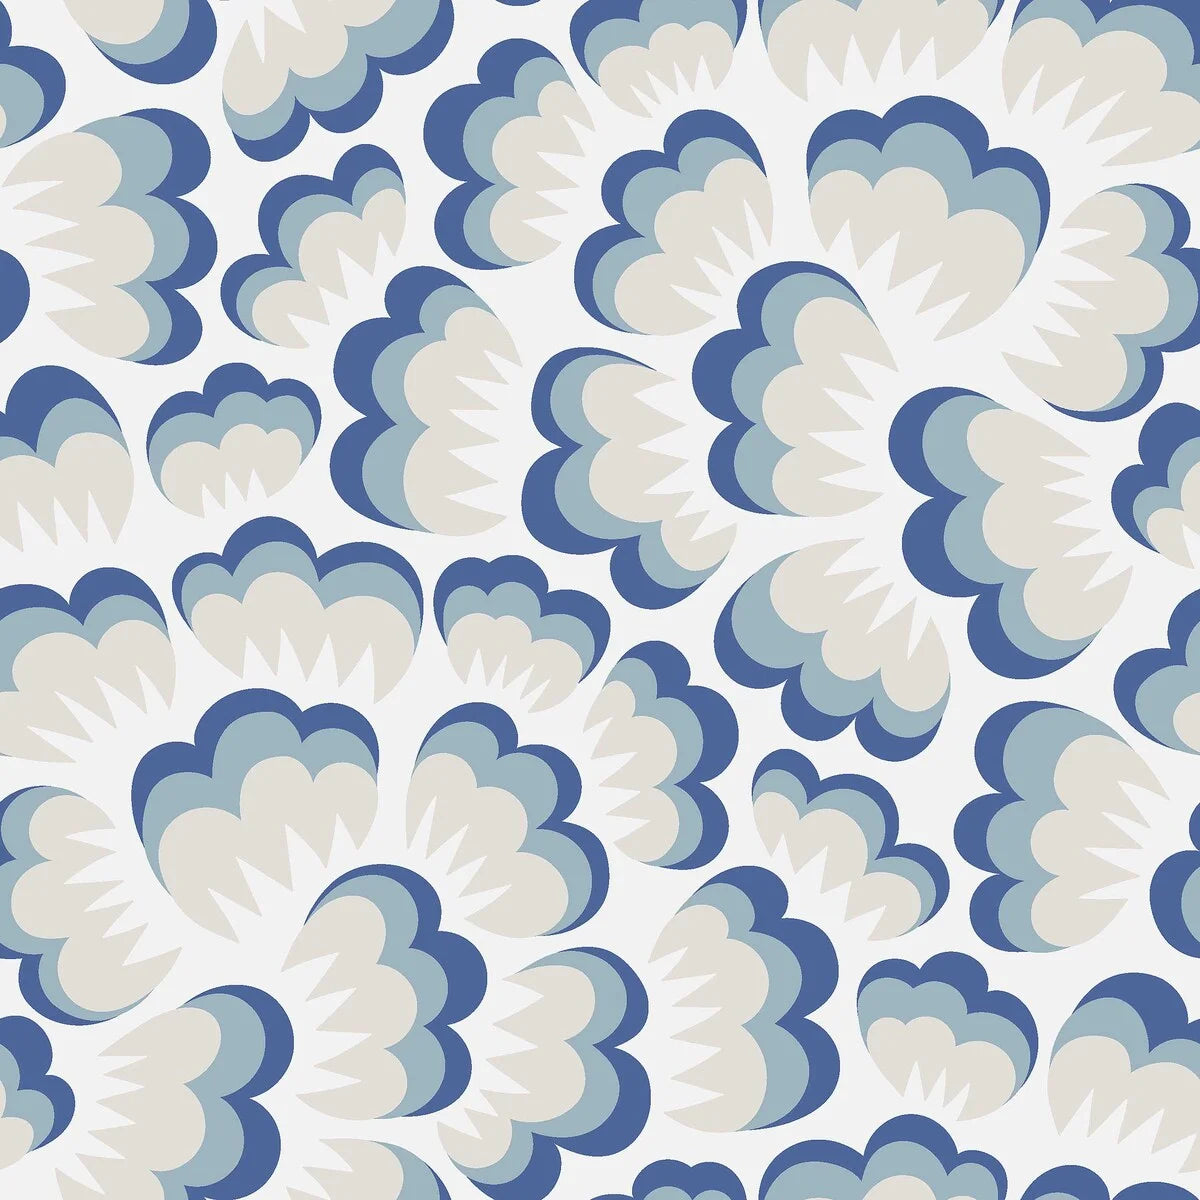 Cheerful and dreamy, our Bom Bom wallpaper is colored in tones of beige, dove blue, and barley blue on a crisp white background.